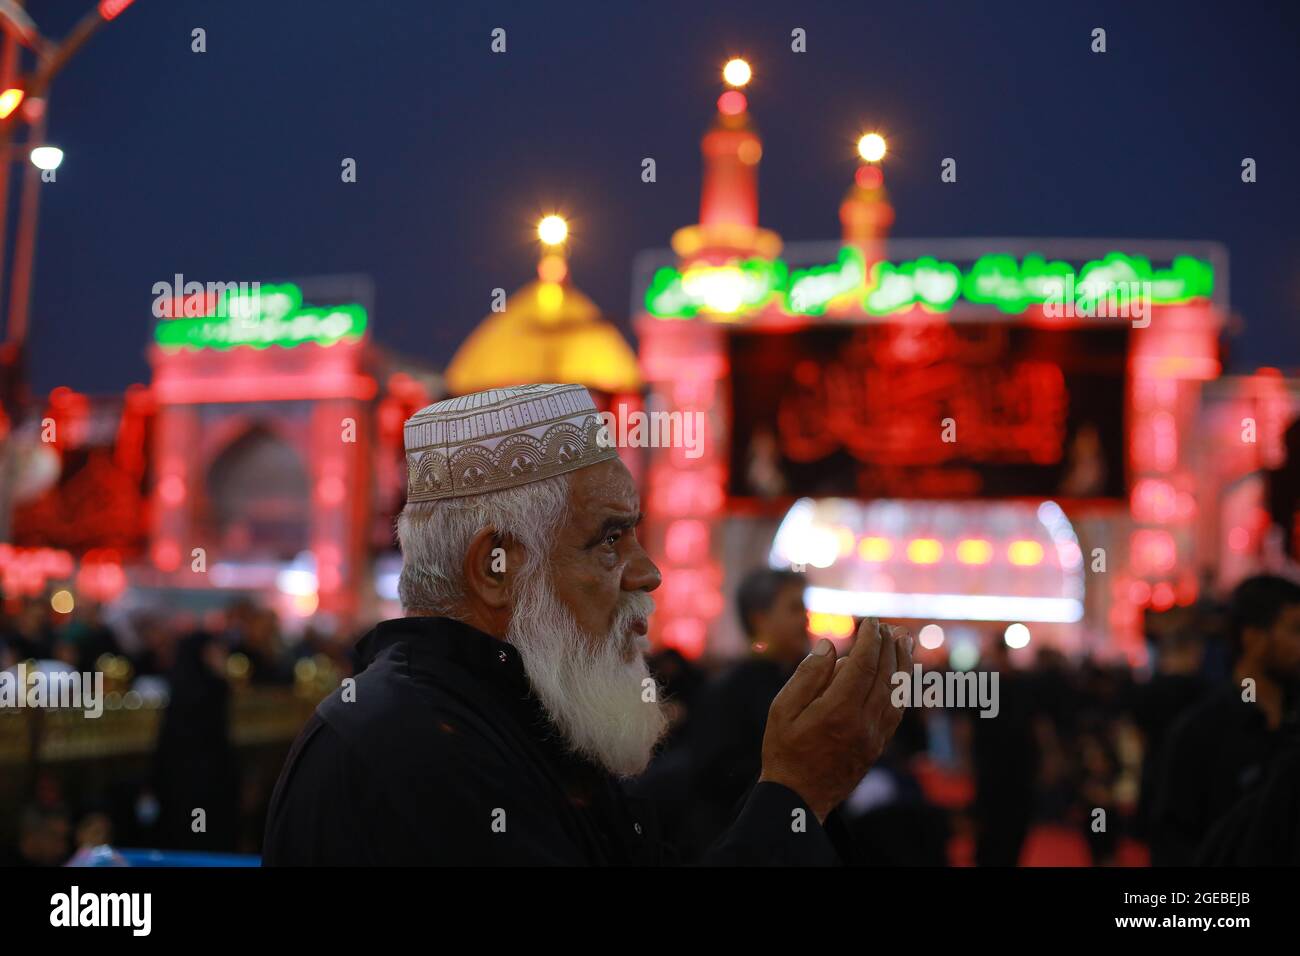 Karbala, Iraq. 18th Aug, 2021. An Iraqi Shiite Muslim man takes part in the mourning procession on the eve of Ashura Day, held on the 9th day of the month of Muharram, the first month of the Islamic calendar, at the Imam Abbas shrine in Iraq's holy city of Karbala. Muharram is considered a month of mourning and remembrance for Shiite Muslims around the world, in which they commemorate the martyrdom of the grandson of the Islamic prophet Mohammad, Husayn ibn Ali, who was killed in the 7th century Battle of Karbala. Credit: Ameer Al Mohammedaw/dpa/Alamy Live News Stock Photo